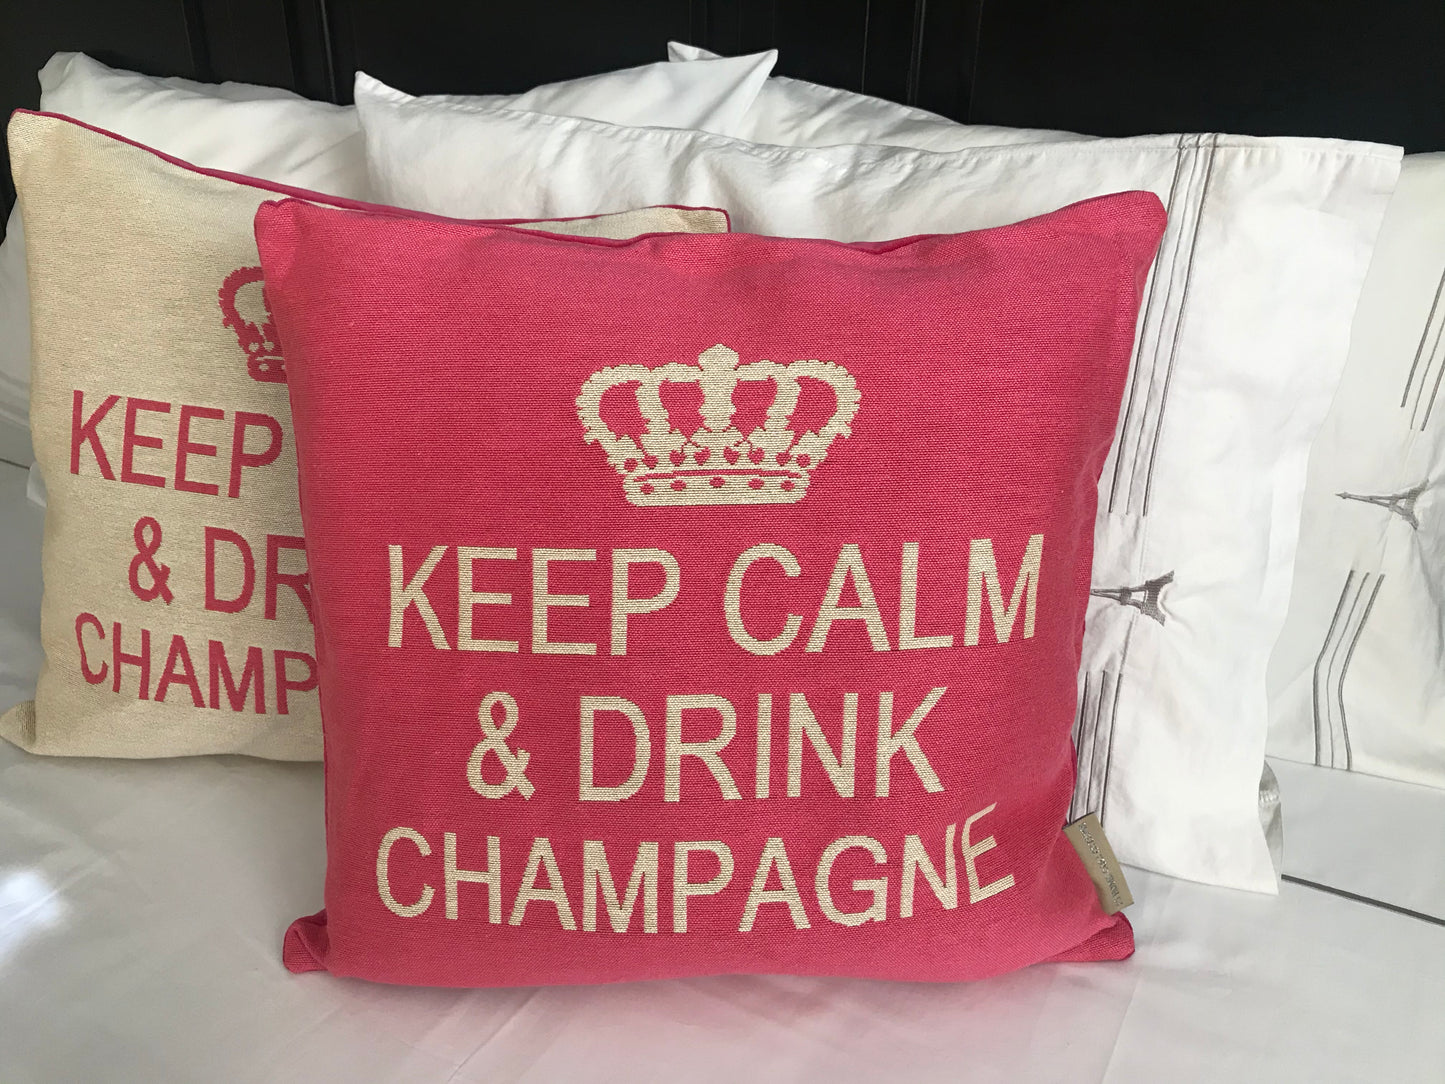 Keep Calm and Drink Champagne Decorative Pillow Cover - (Pink and Cream)